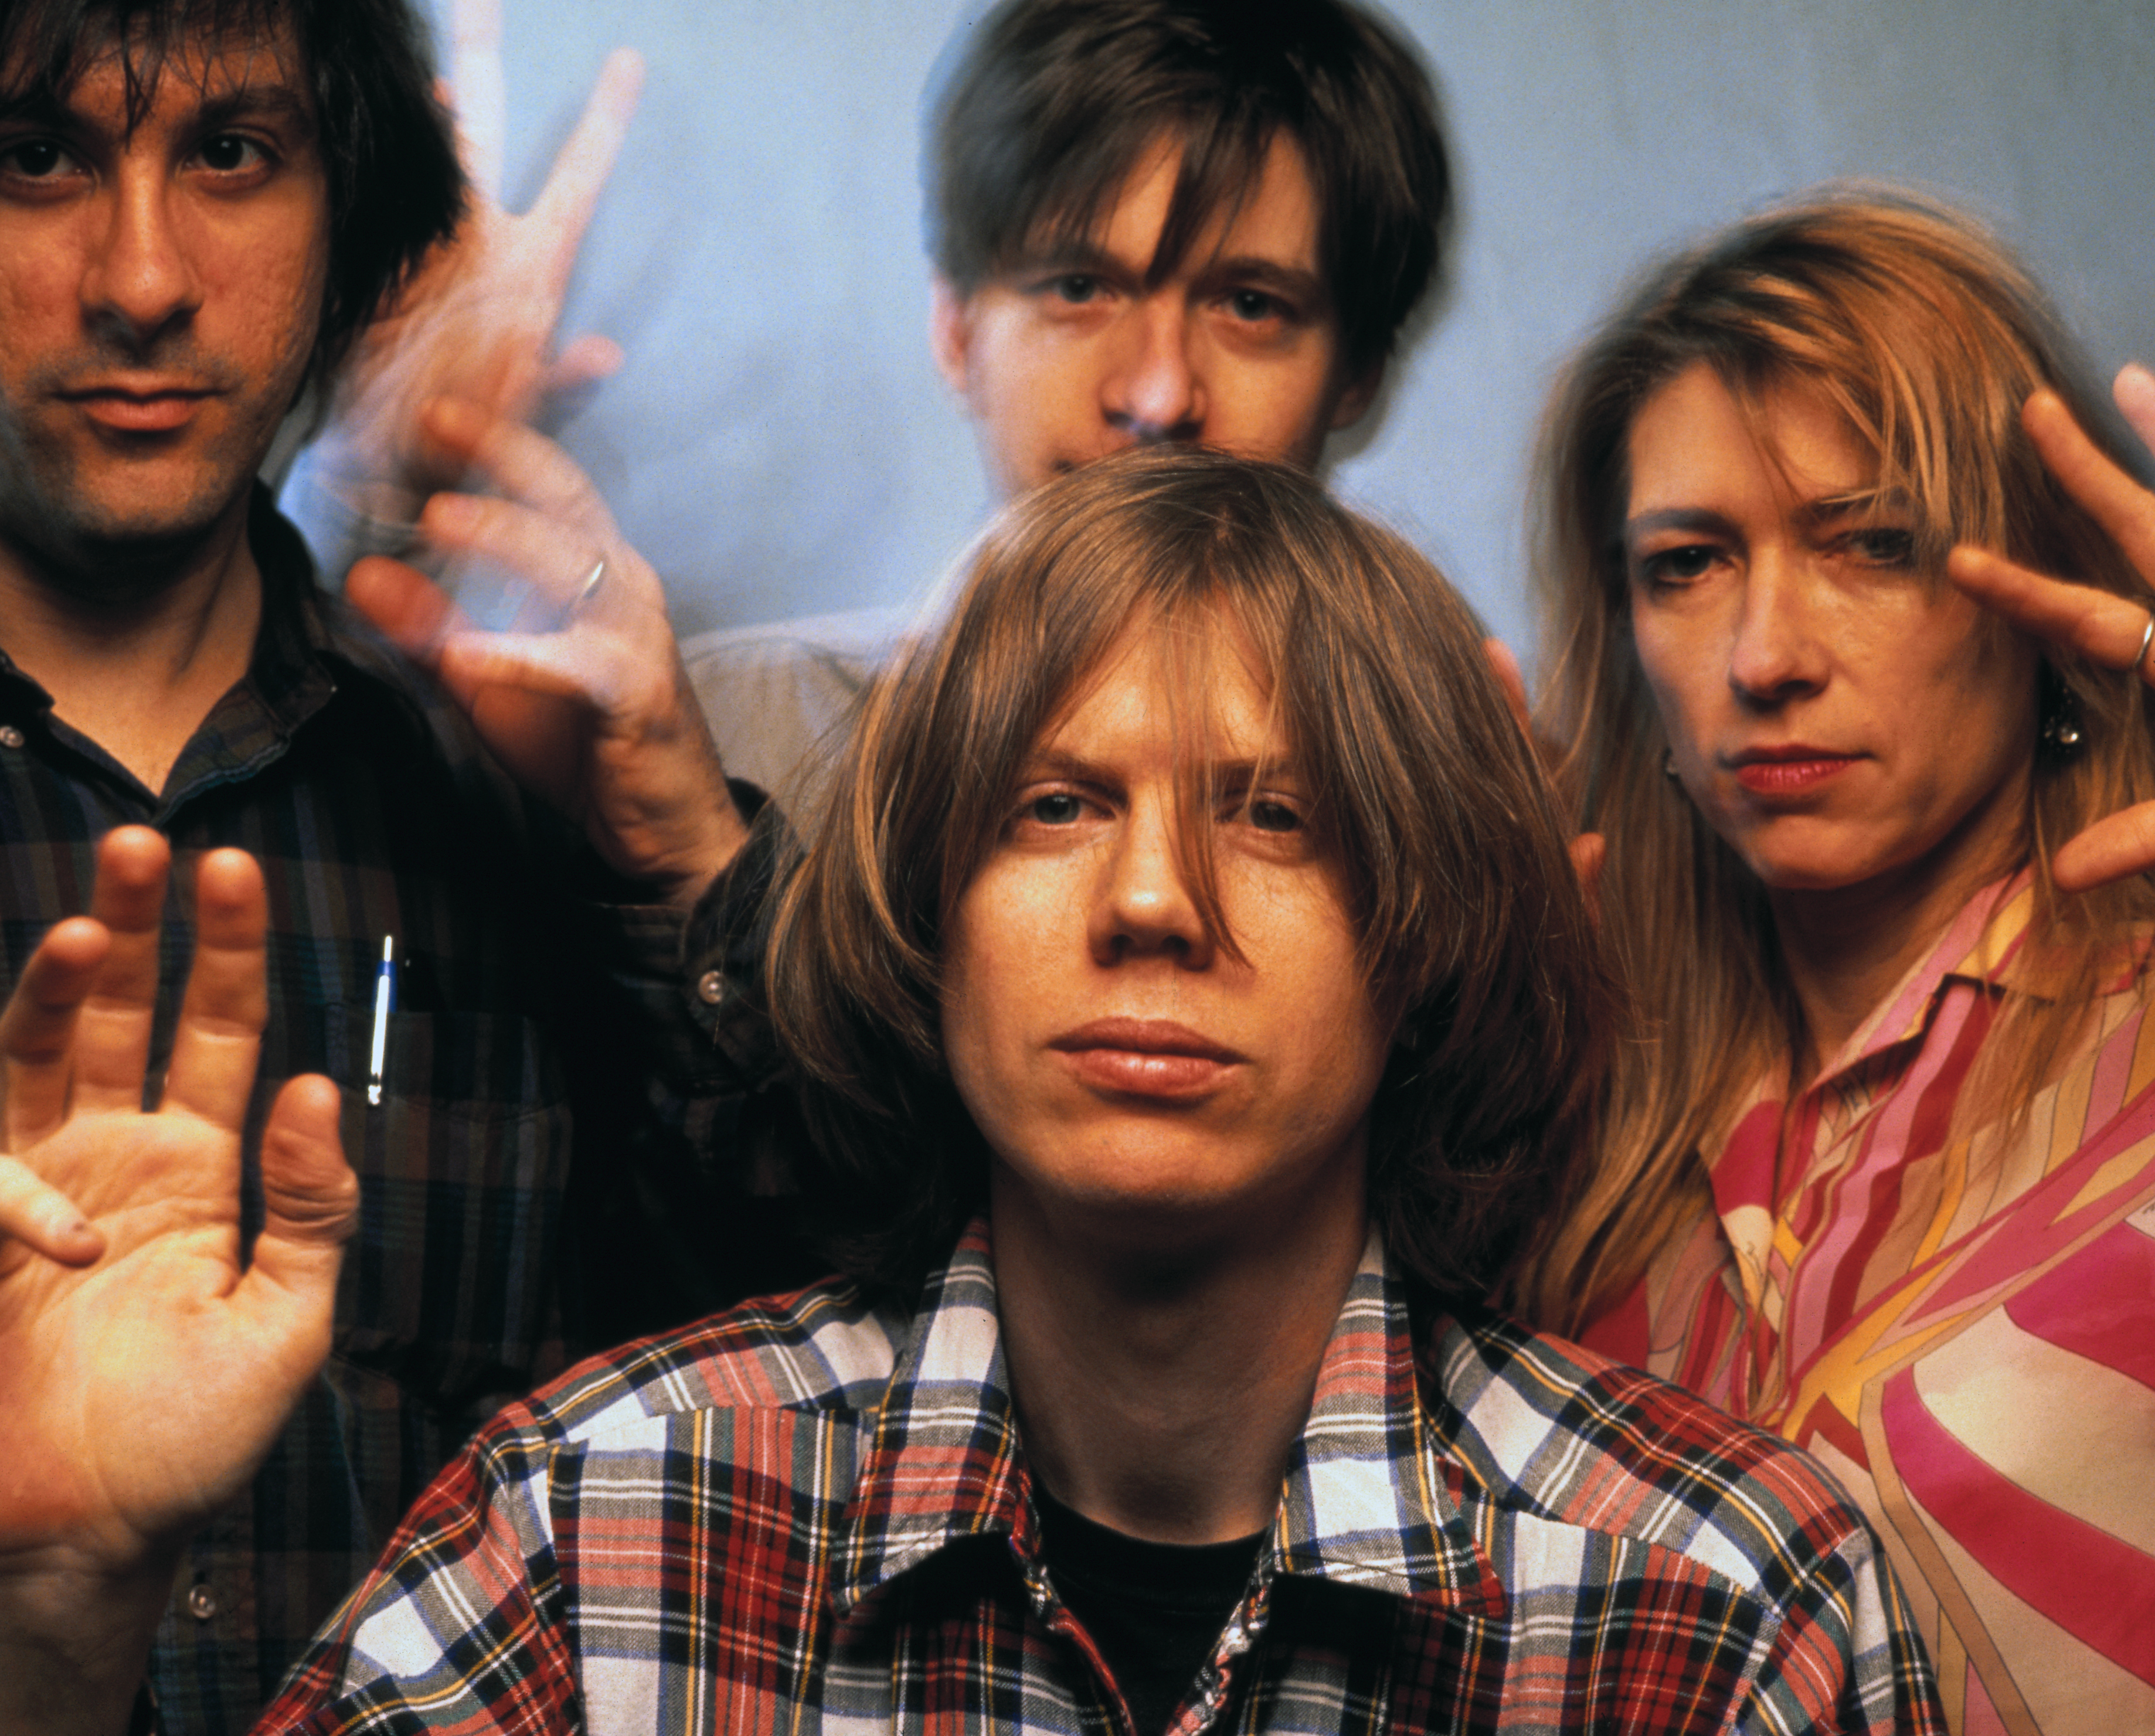 Thurston Moore on New LP, 2020 Election, Meeting Our Publication's Founder